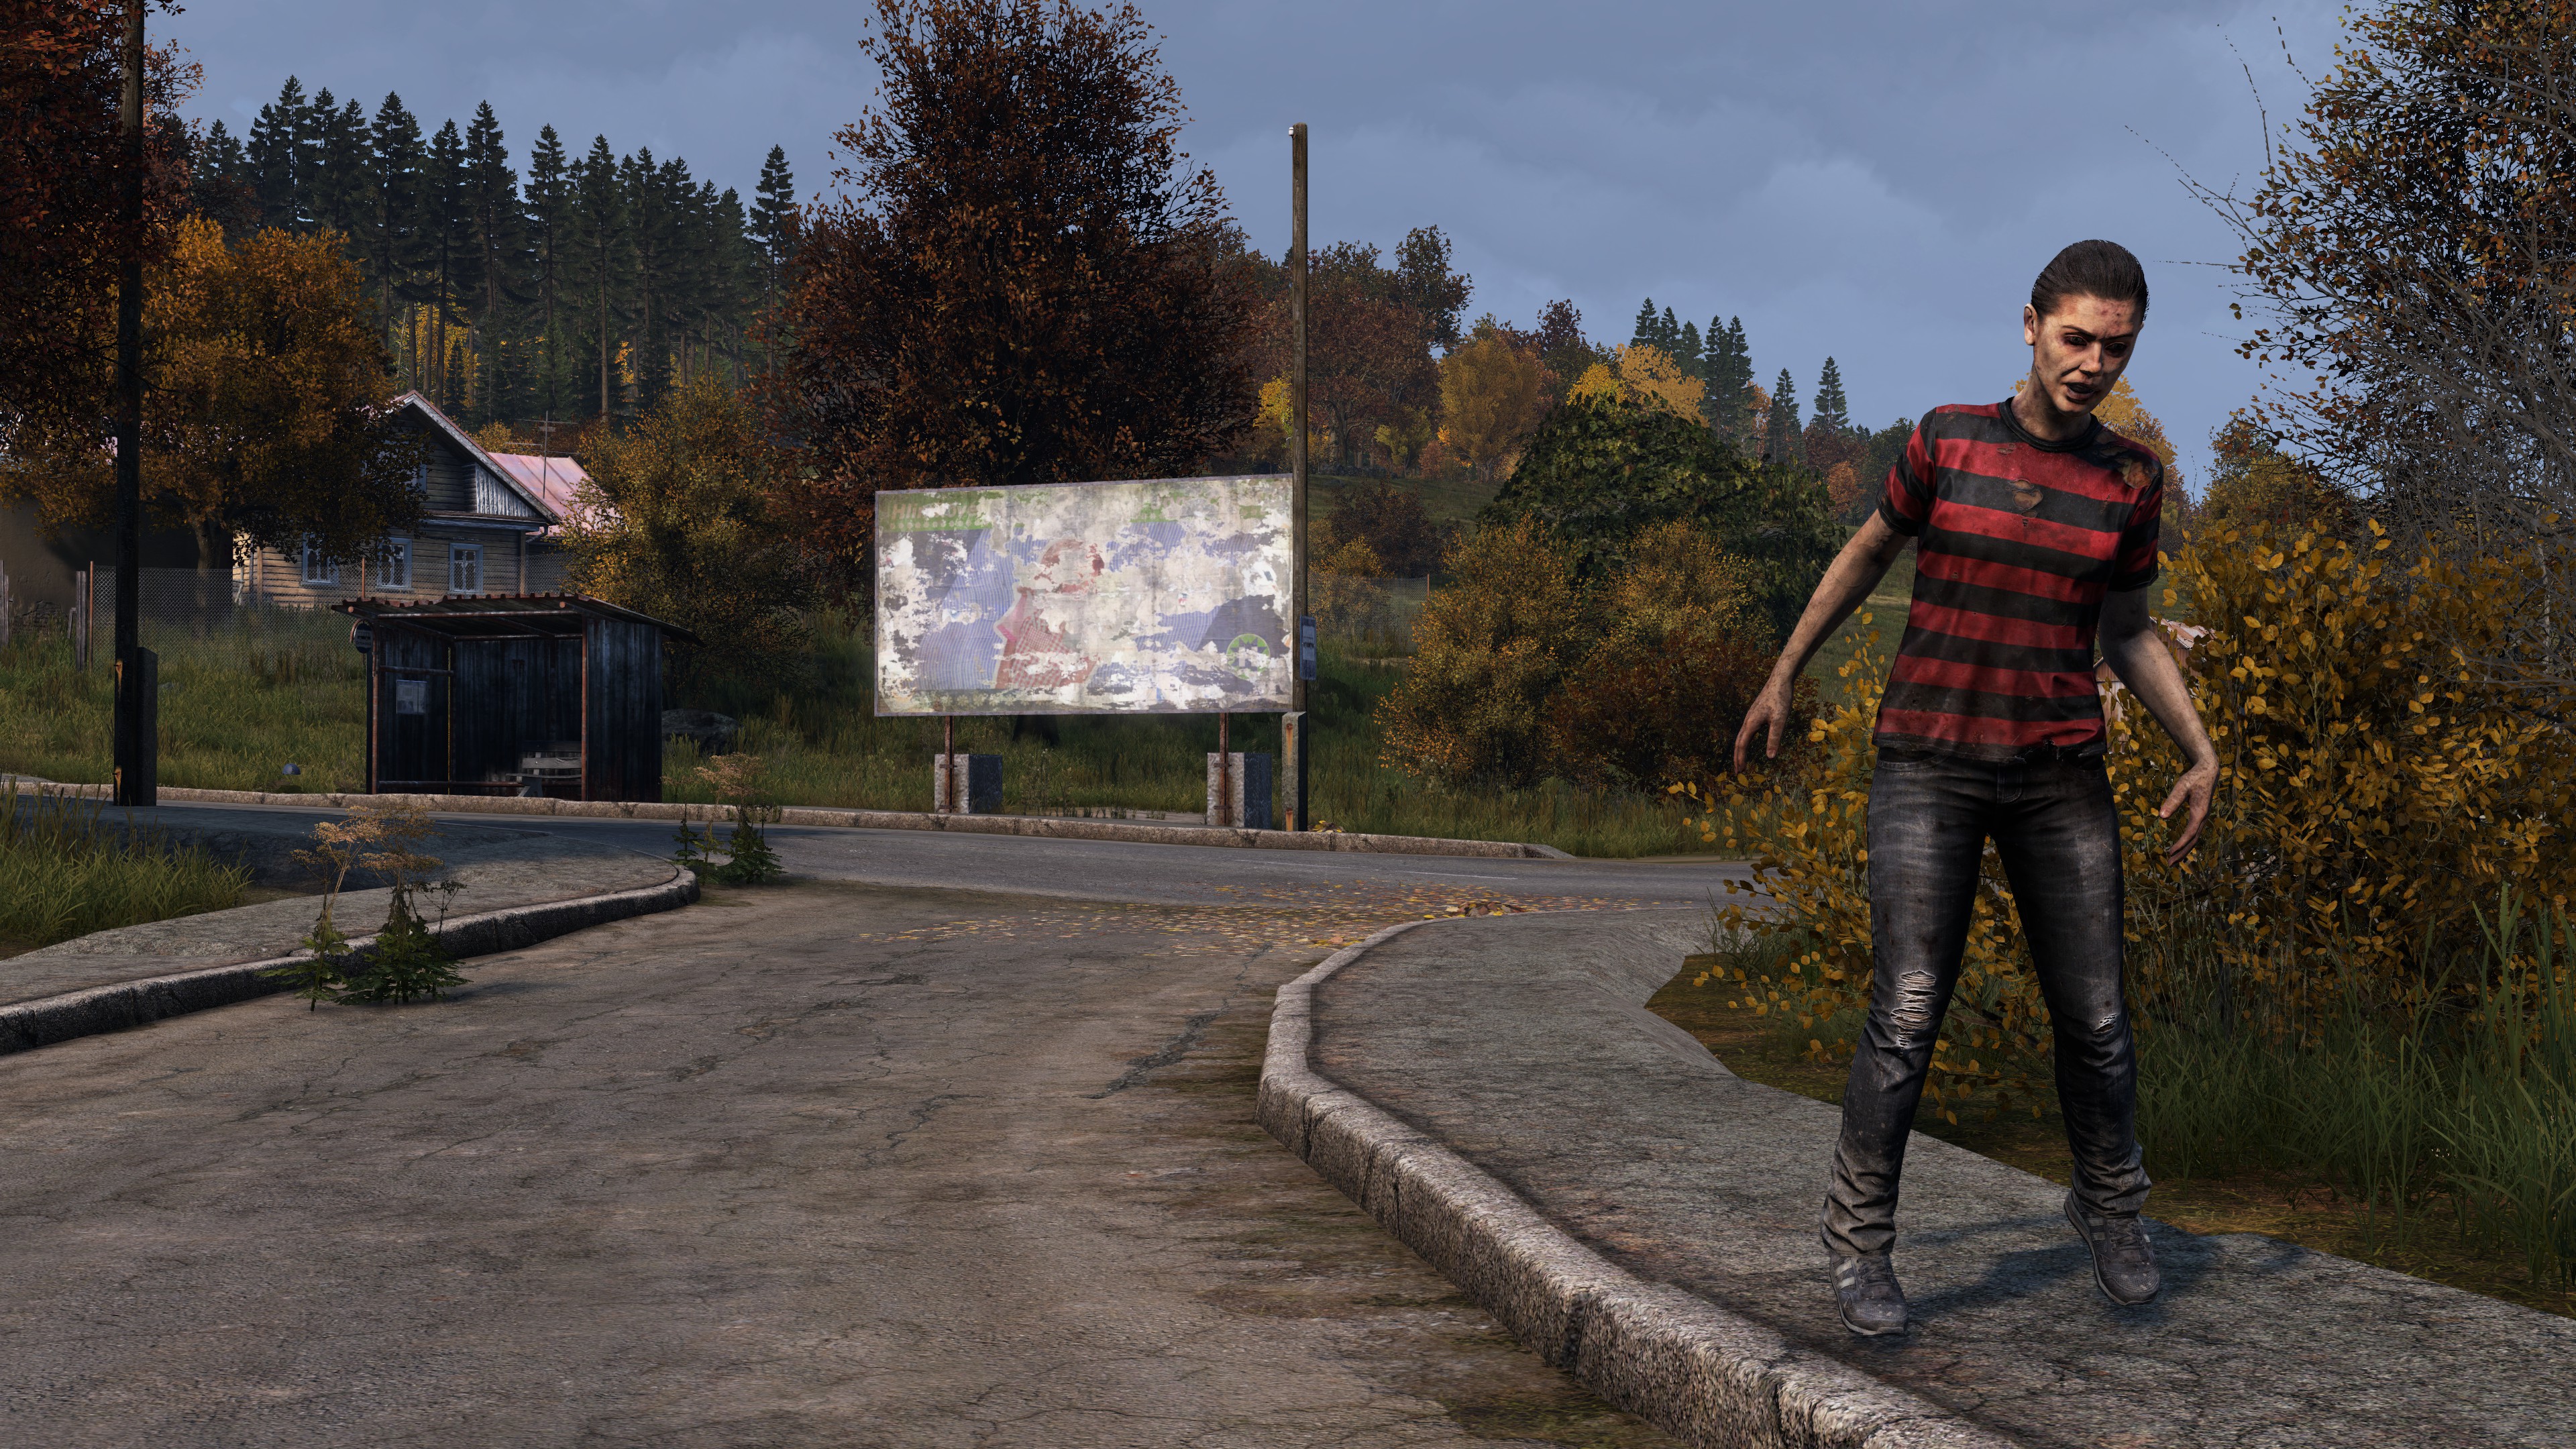 no zombies in dayz standalone